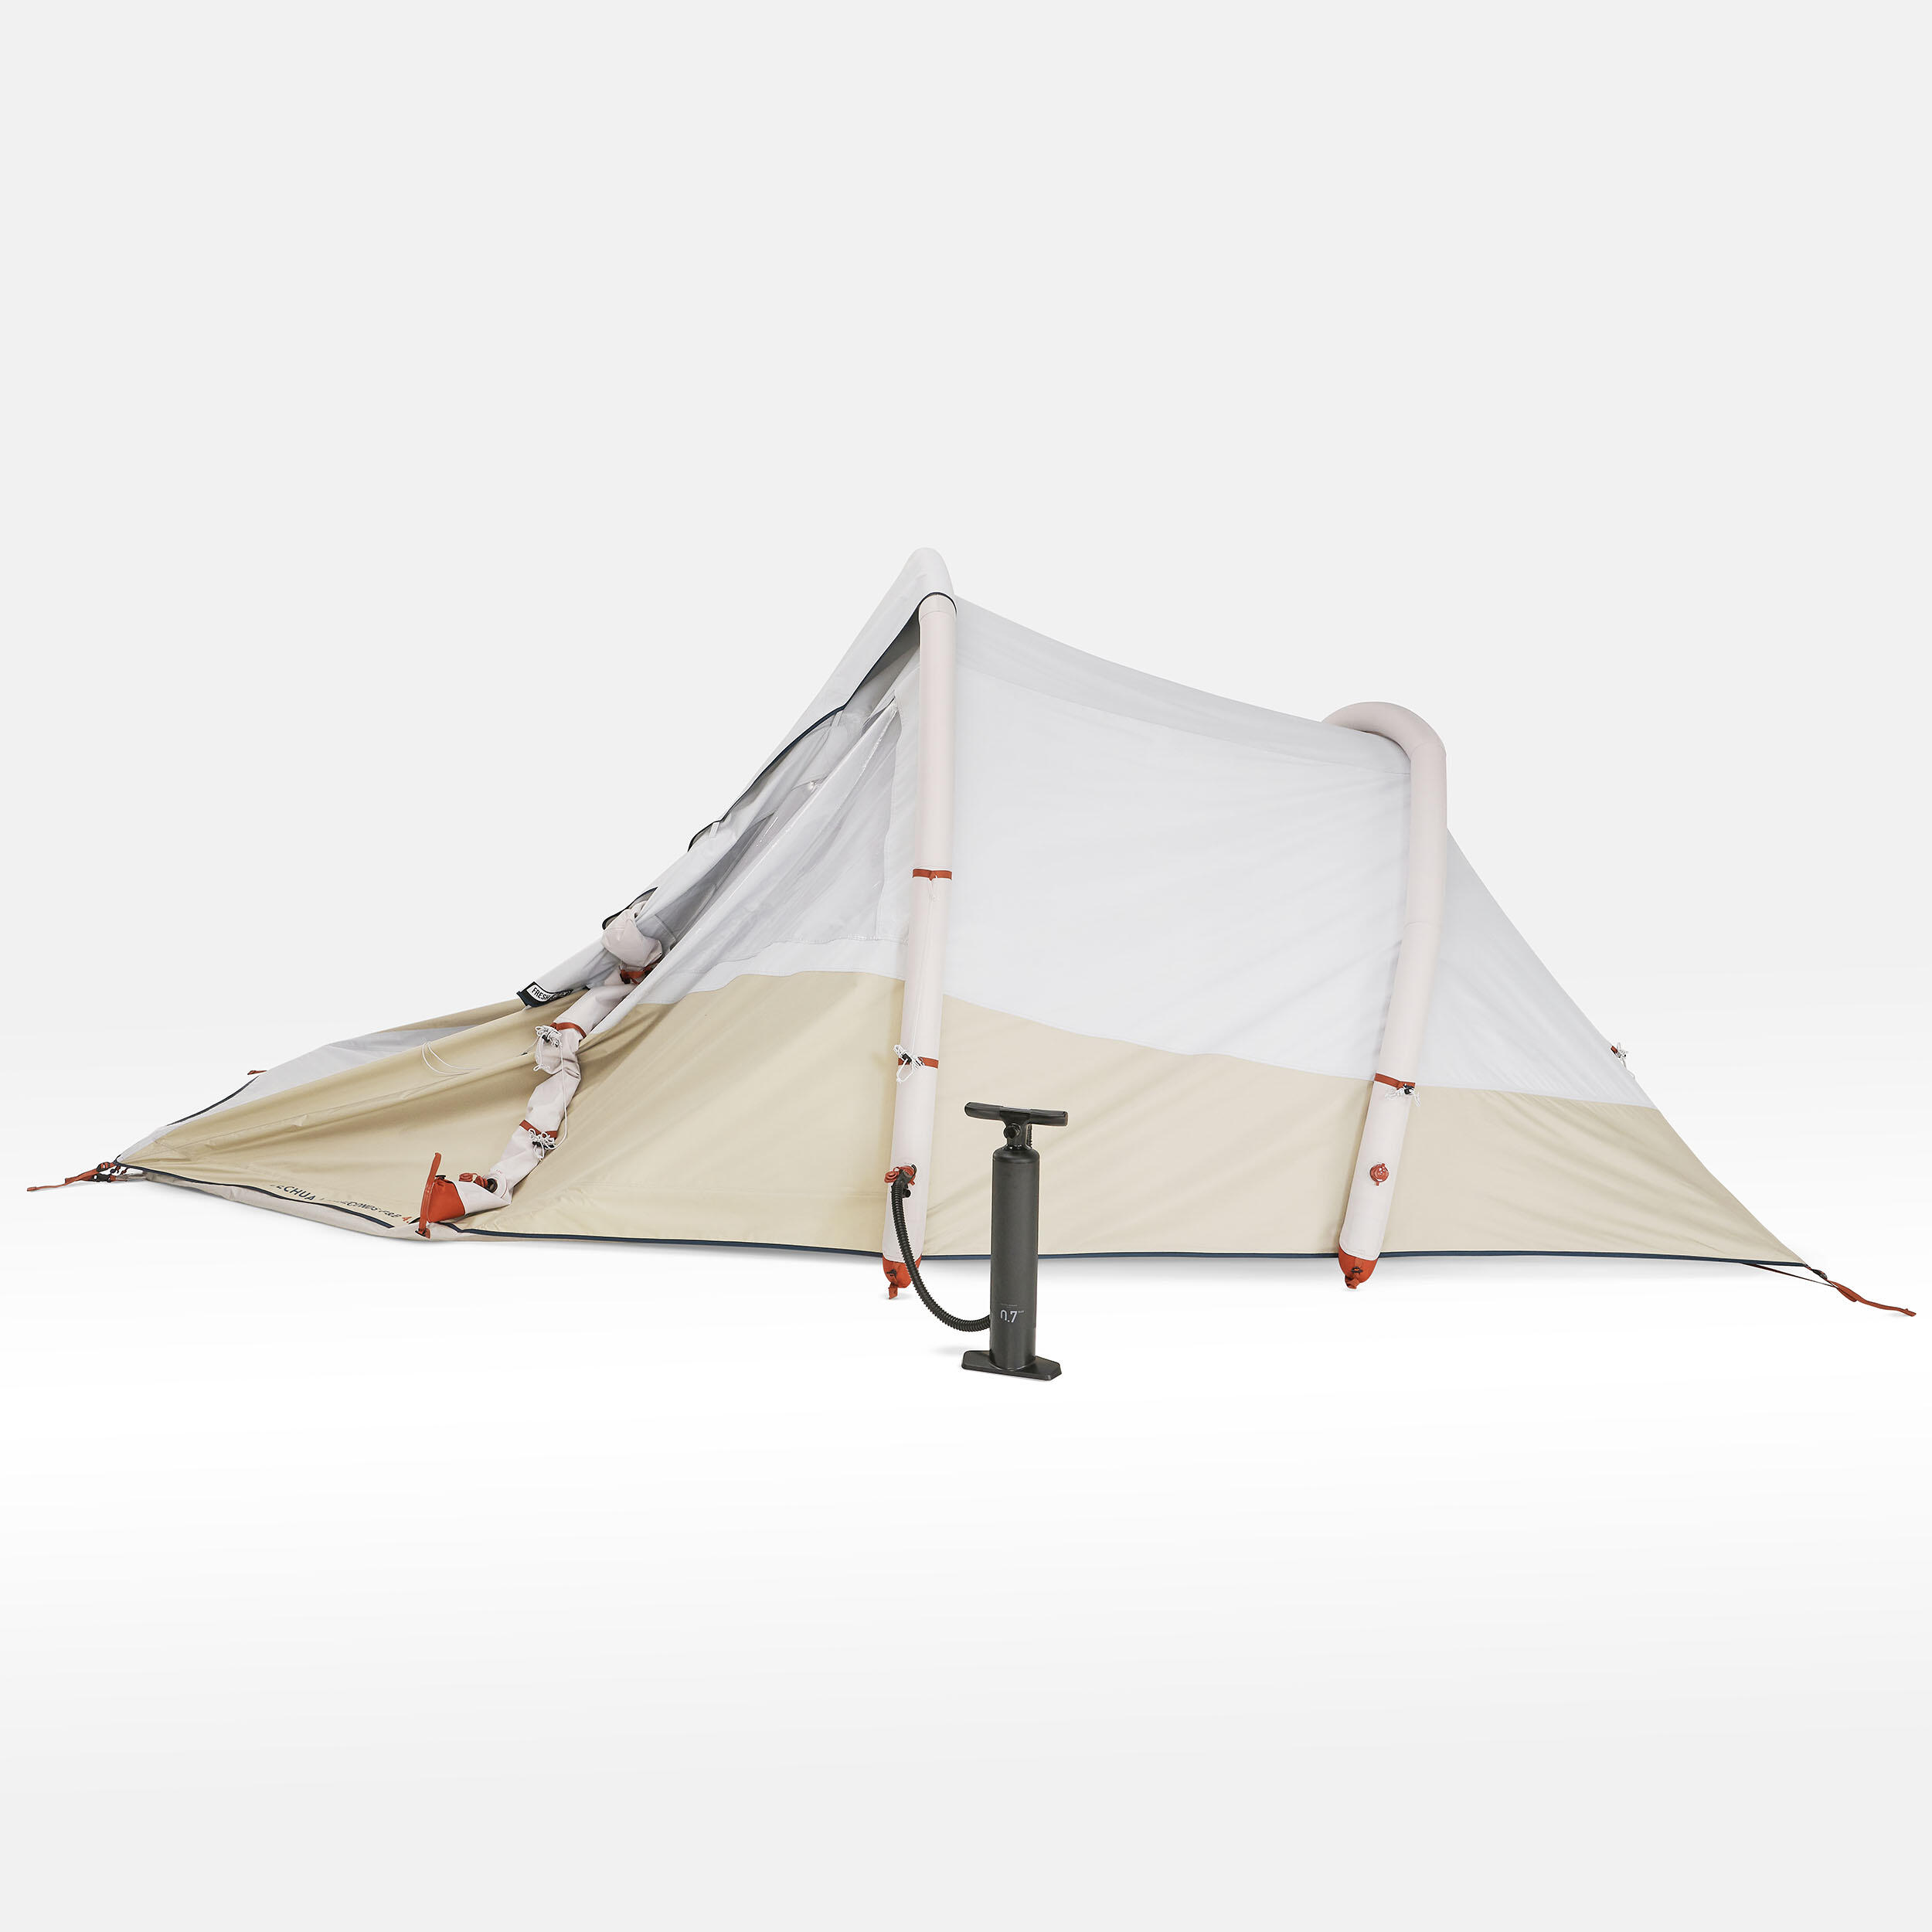 4 Man Inflatable Blackout Tent - Air Seconds 4.1 F&B 29/35